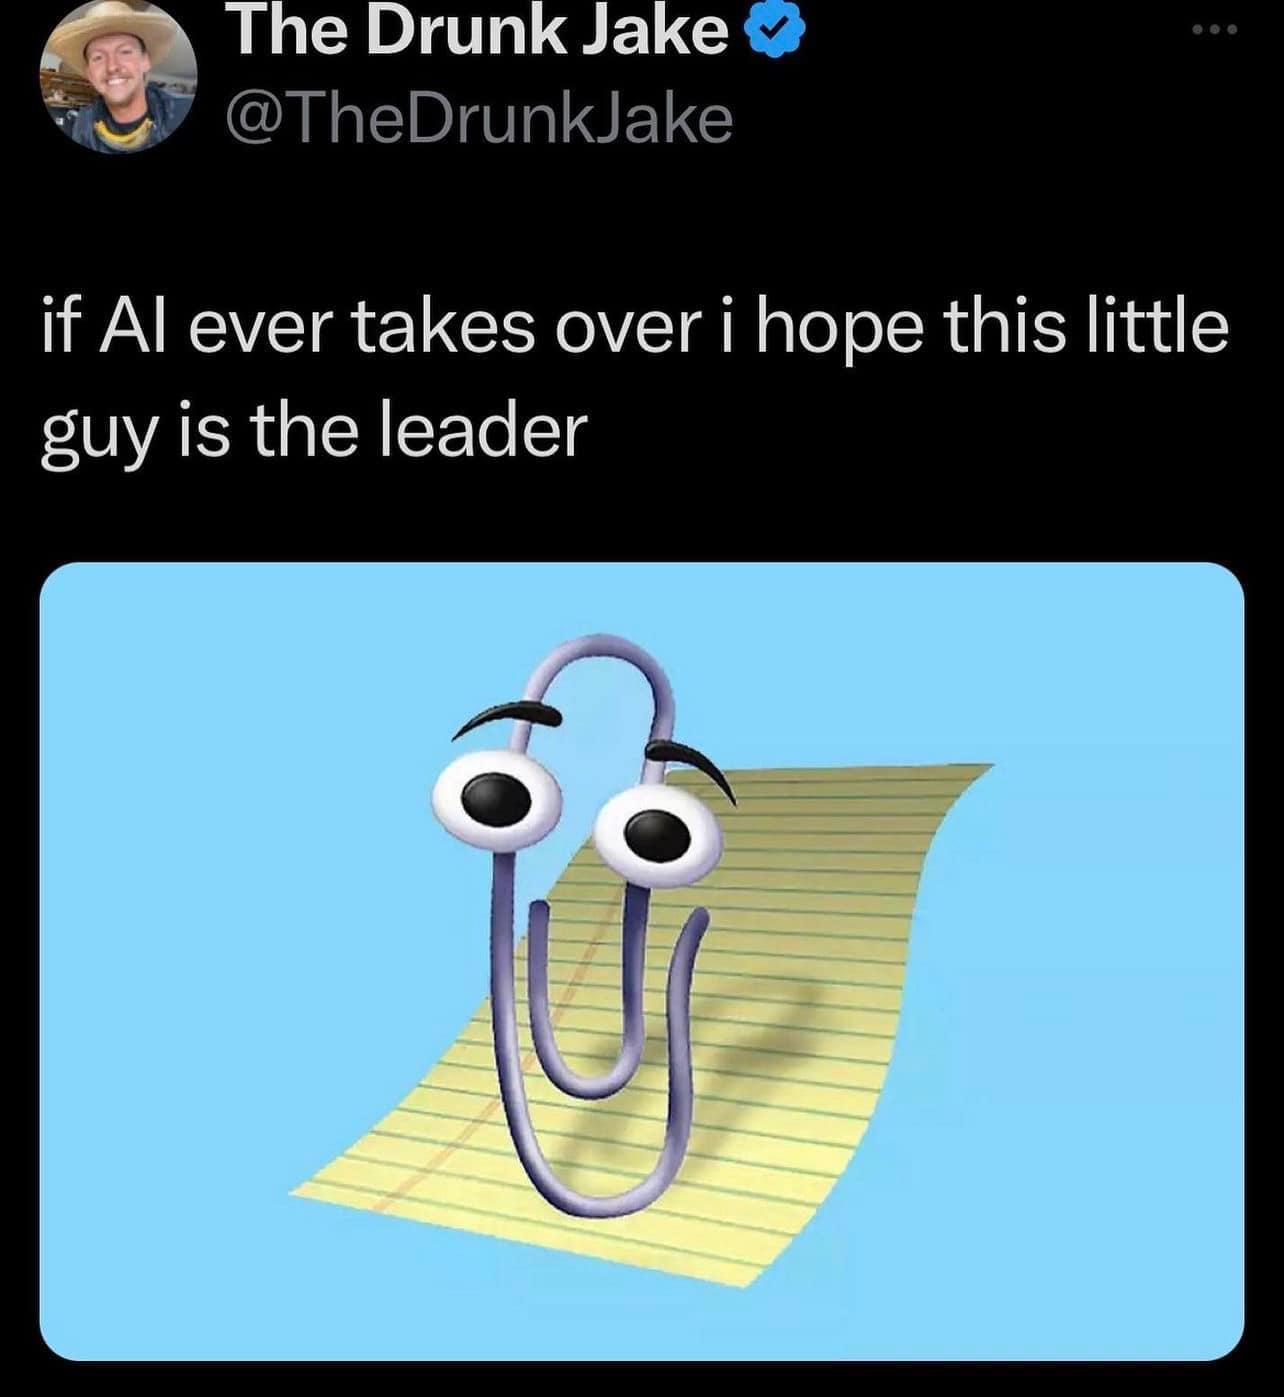 funny tweets and memes - clips office - The Drunk Jake if Al ever takes over i hope this little guy is the leader